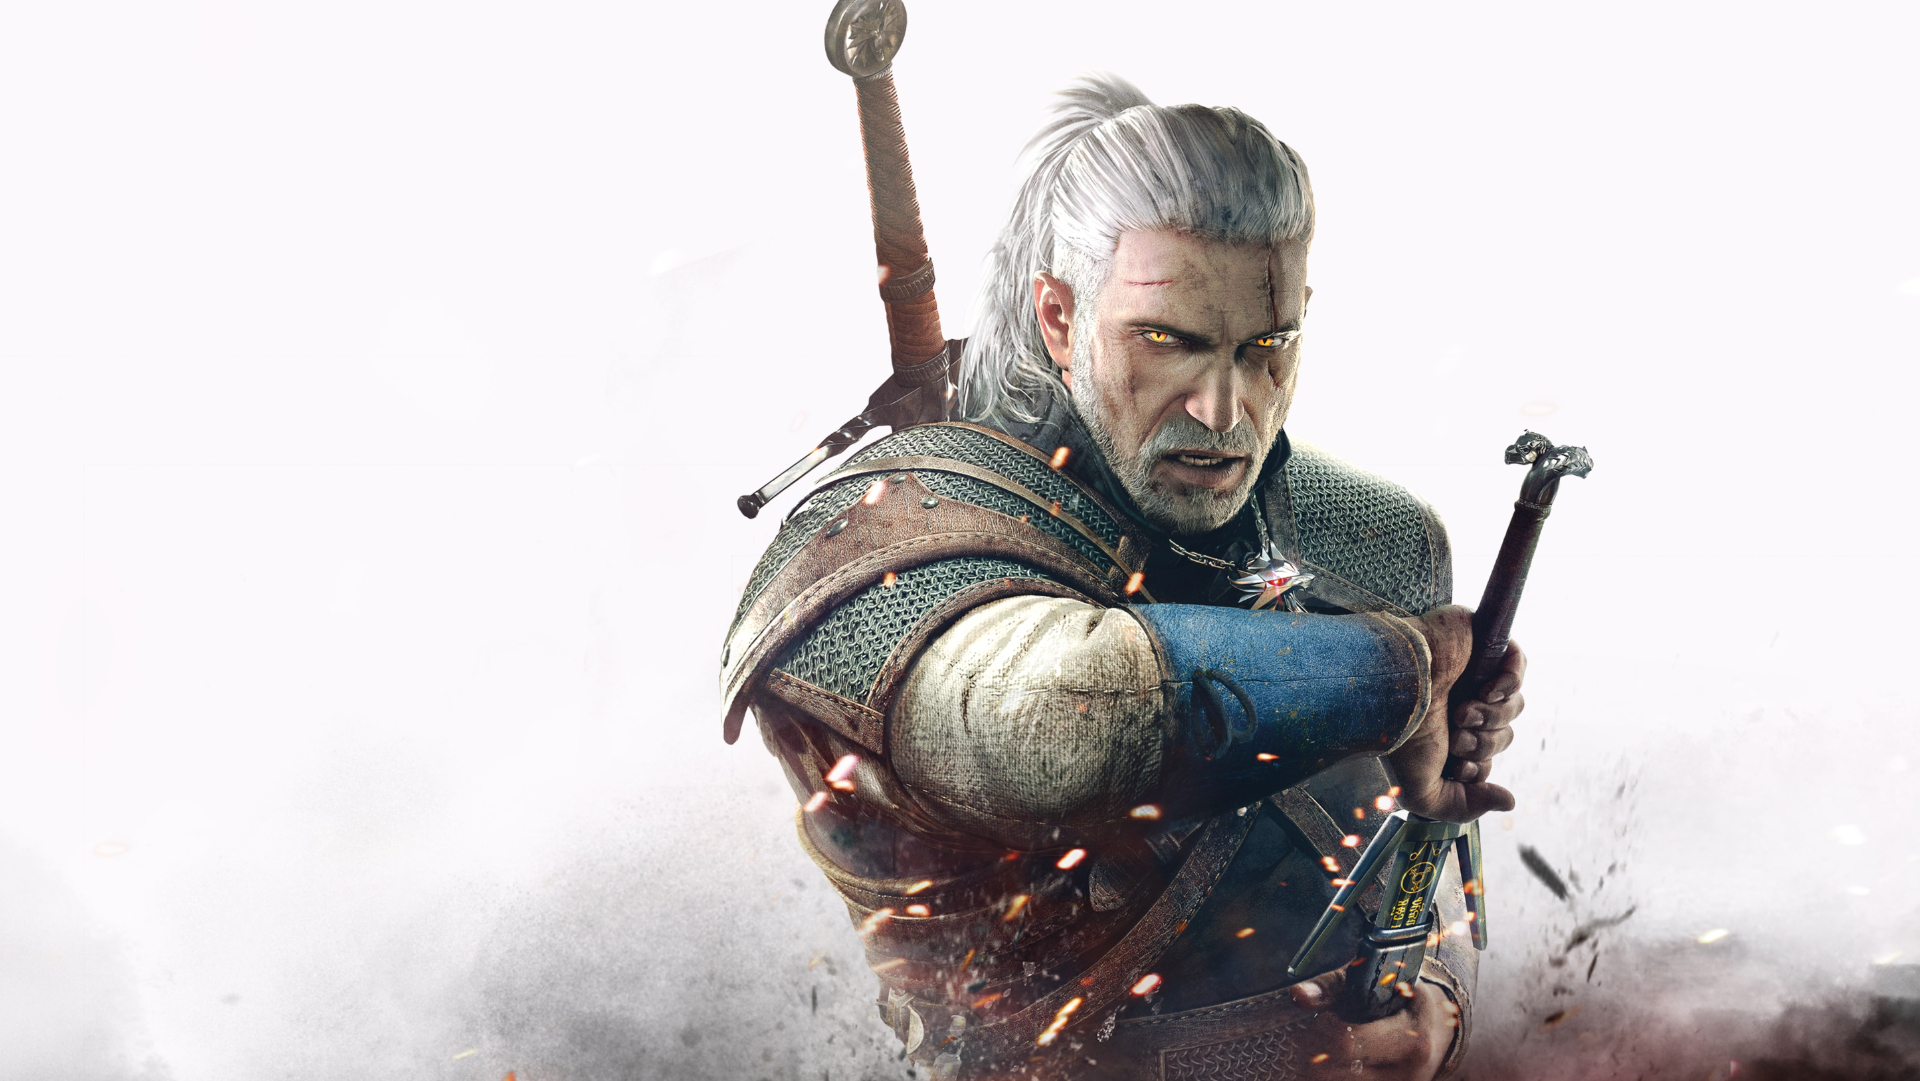 A new Witcher trilogy and Cyberpunk game are in development
at CD Projekt Red